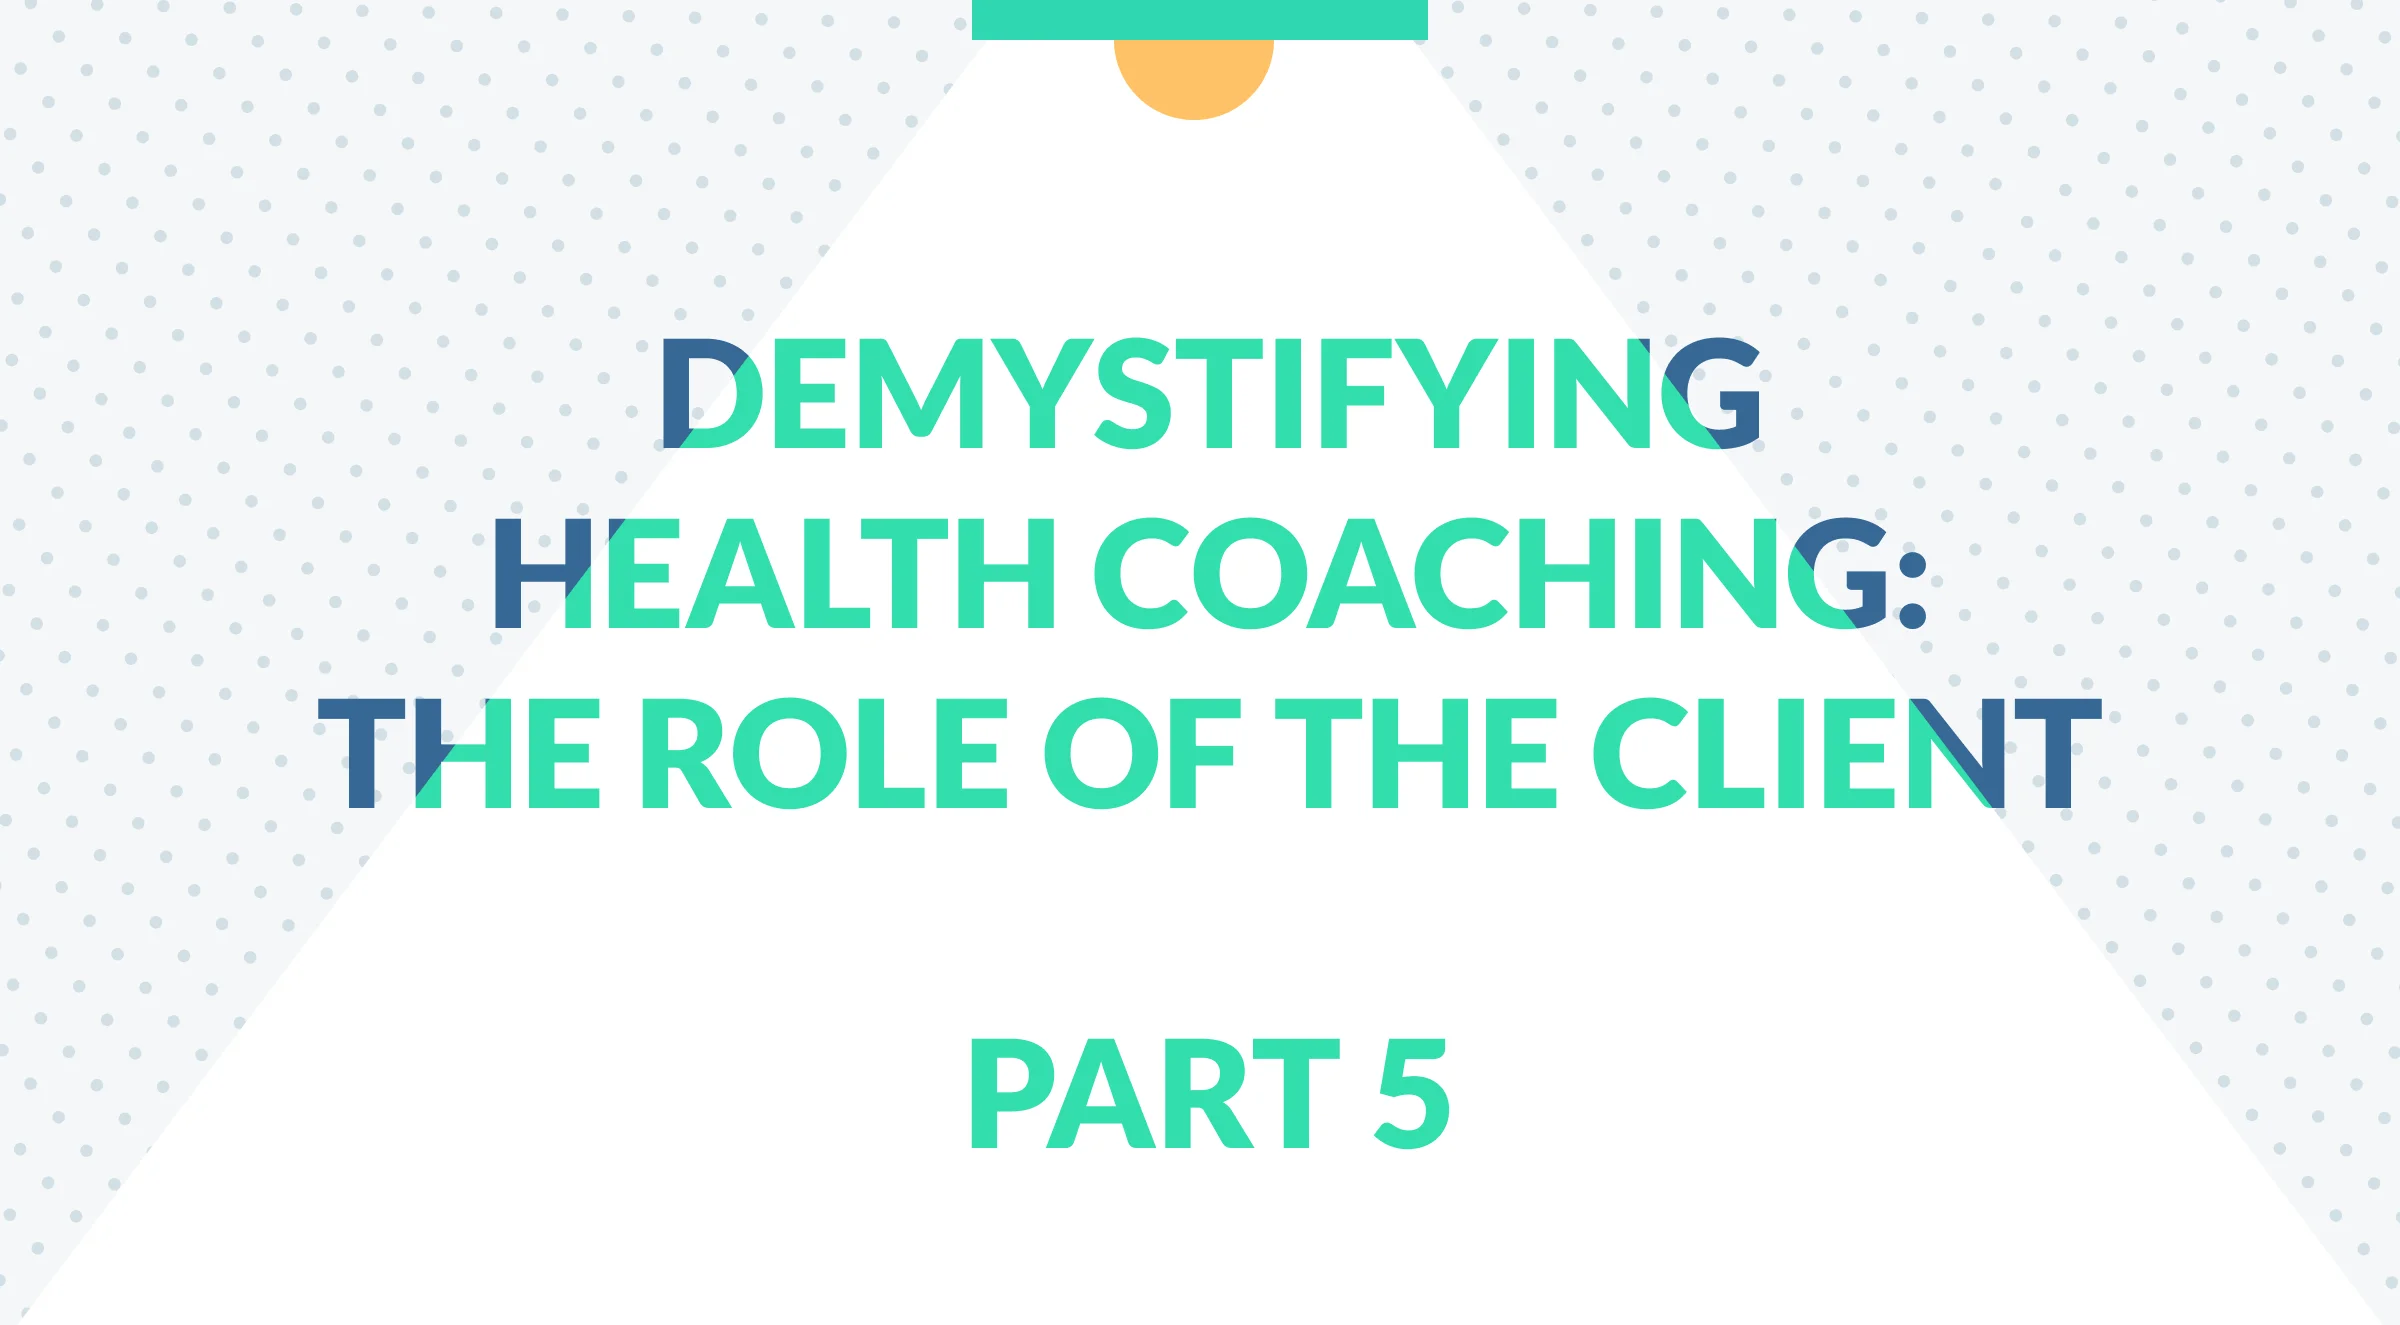 Demystifying Health Coaching The Role of the Client